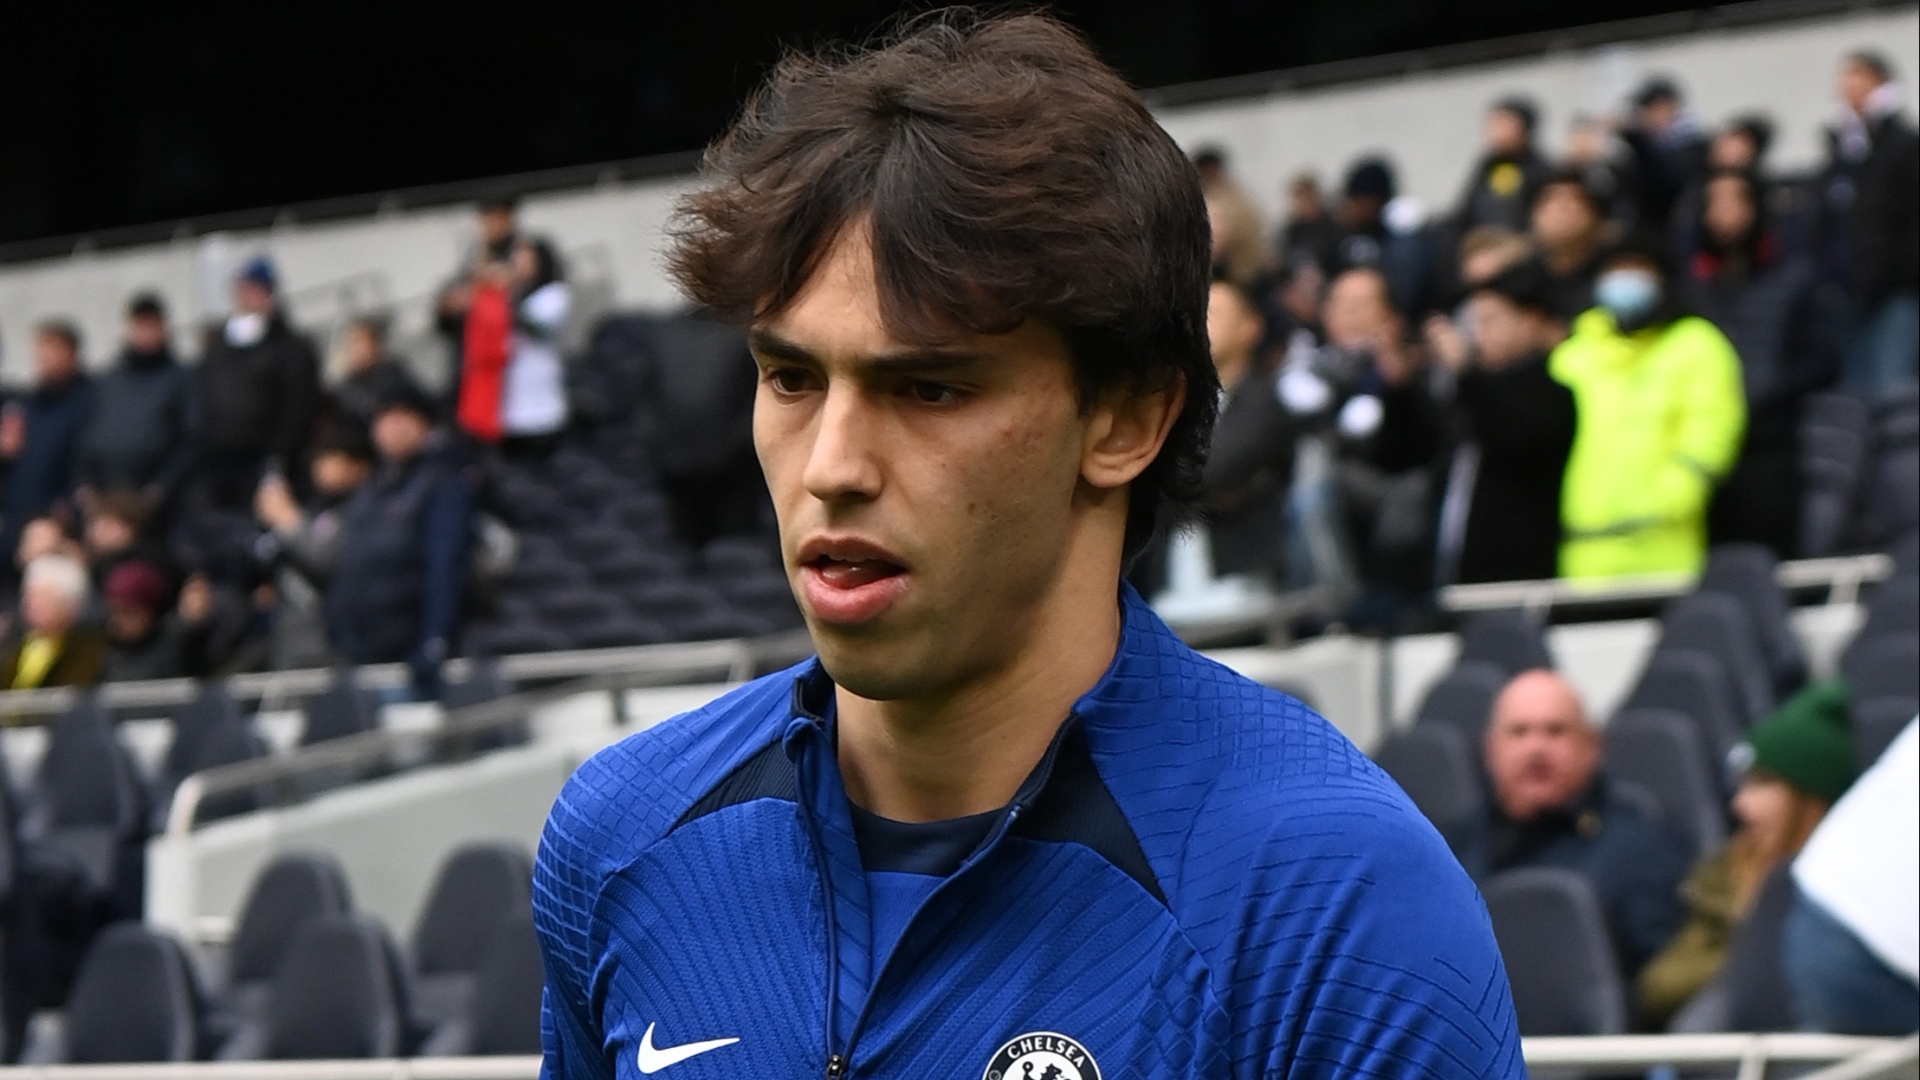 Tottenham fans chant crass song about Pedro Porro and Joao Felix rumour that saw Spurs star forced to deny affair with Chelsea star's girlfriend